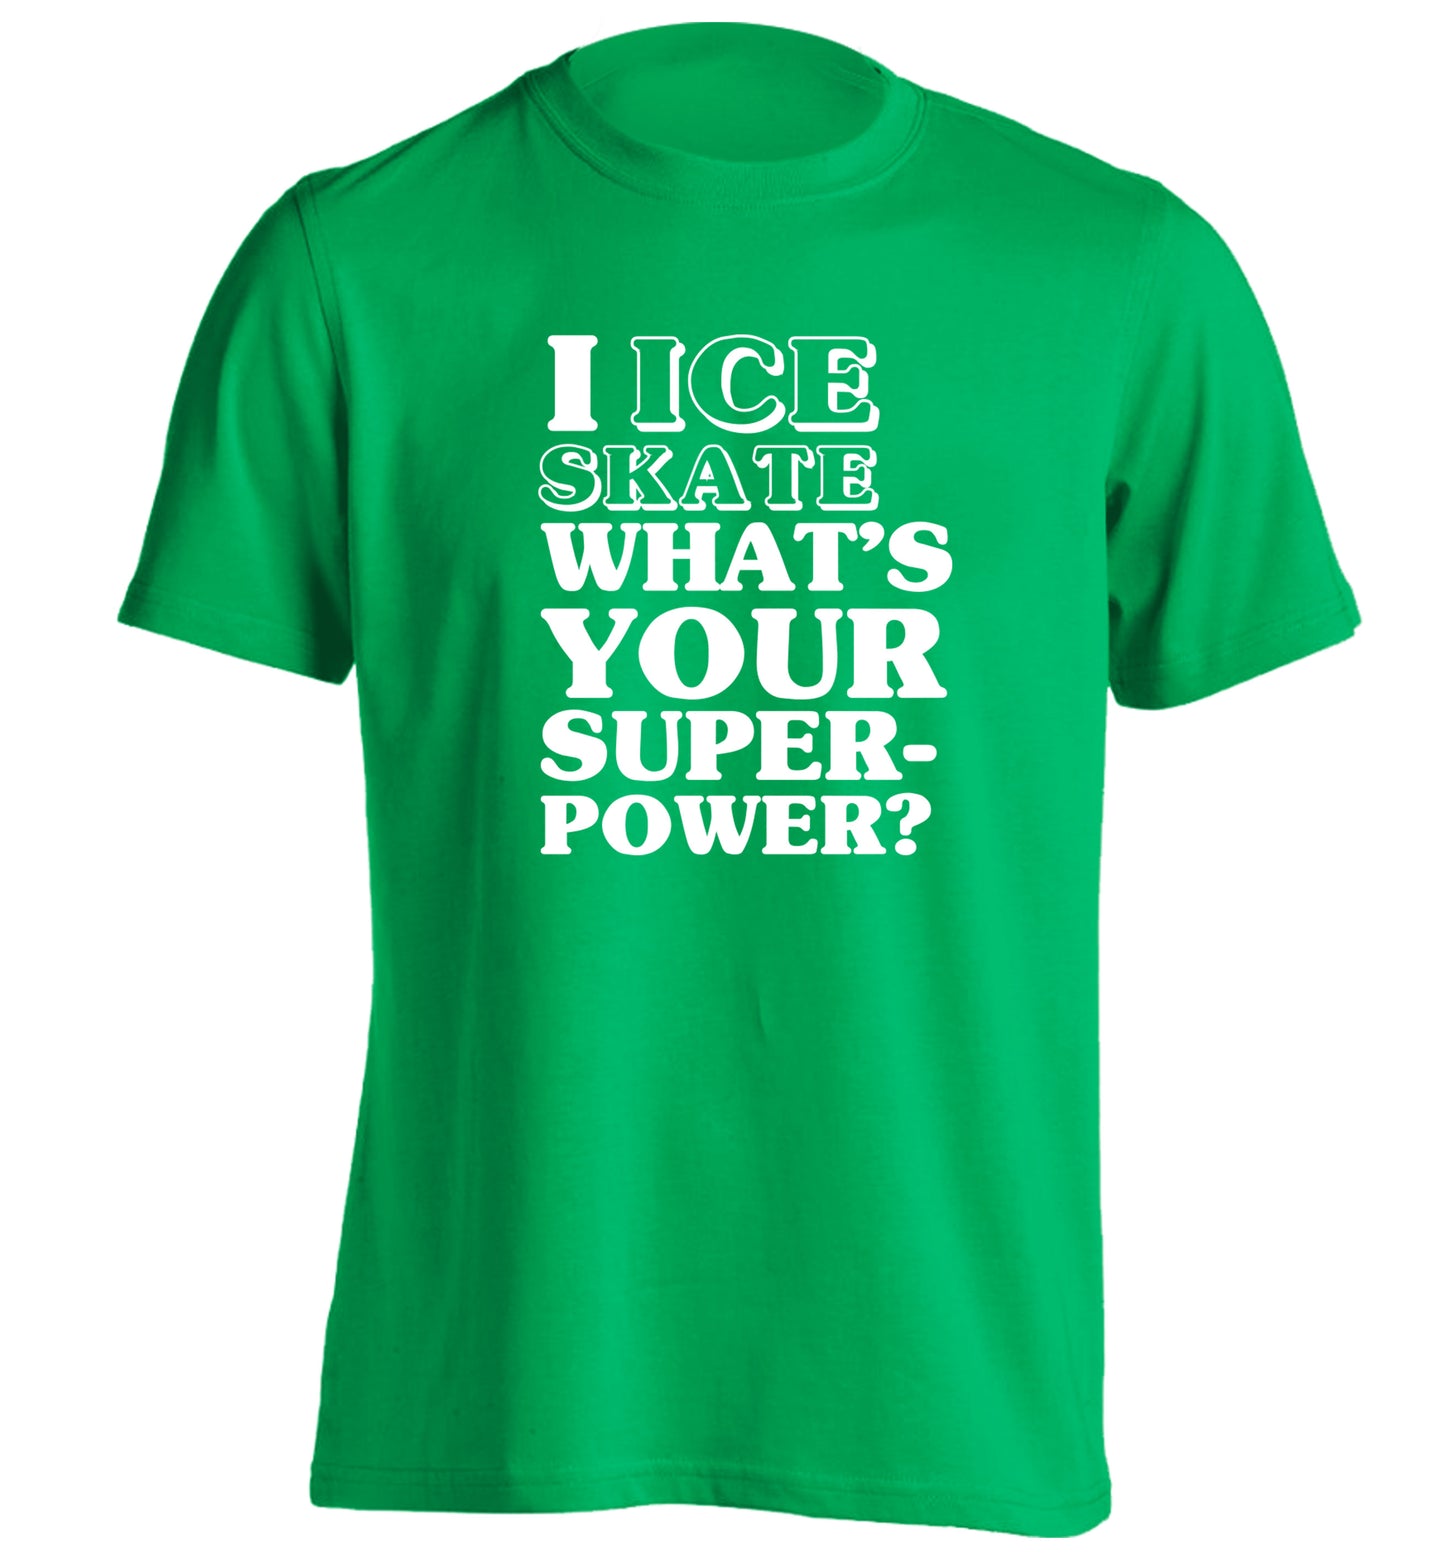 I ice skate what's your superpower? adults unisexgreen Tshirt 2XL